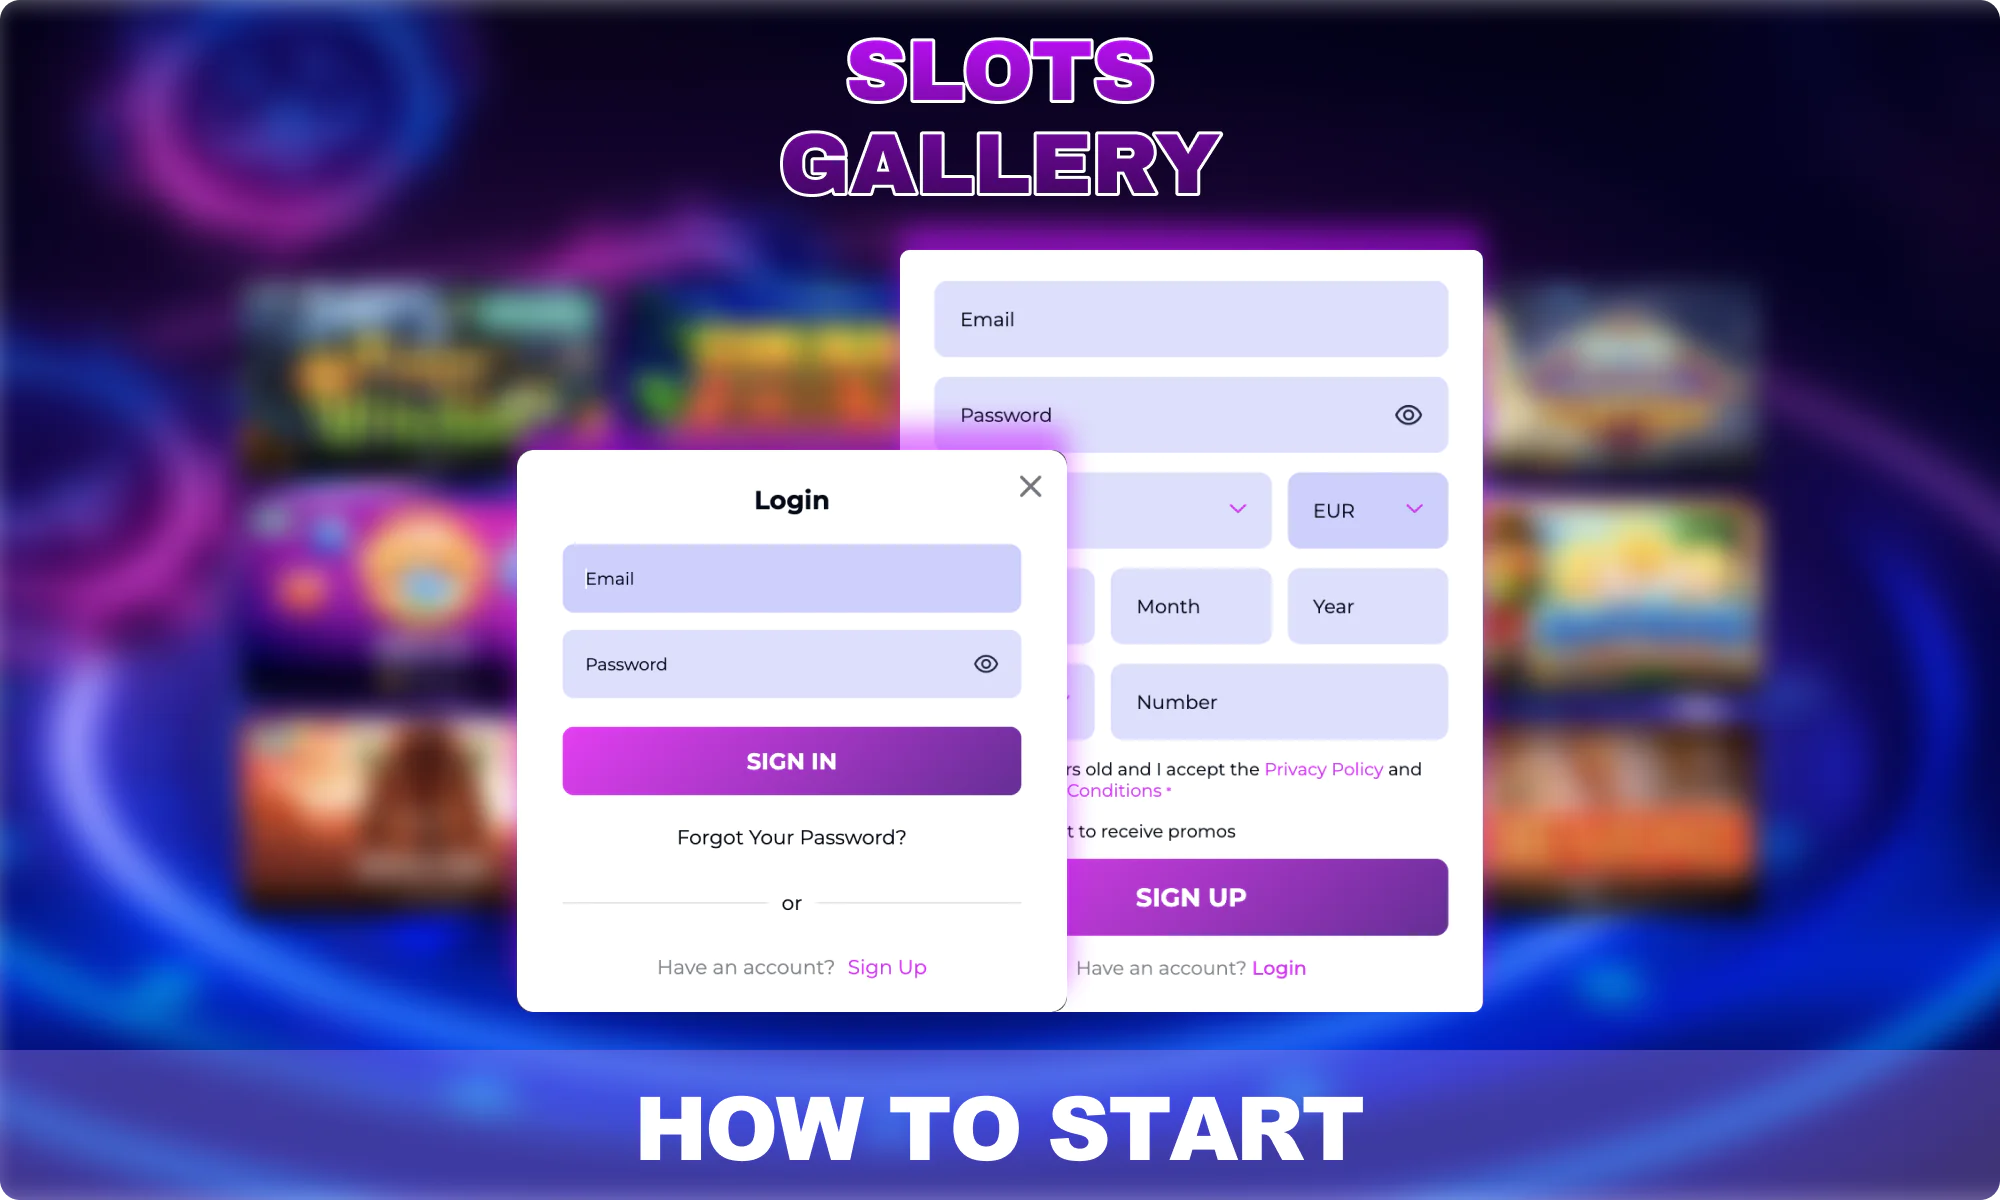 How to start playing at Slots Gallery Casino